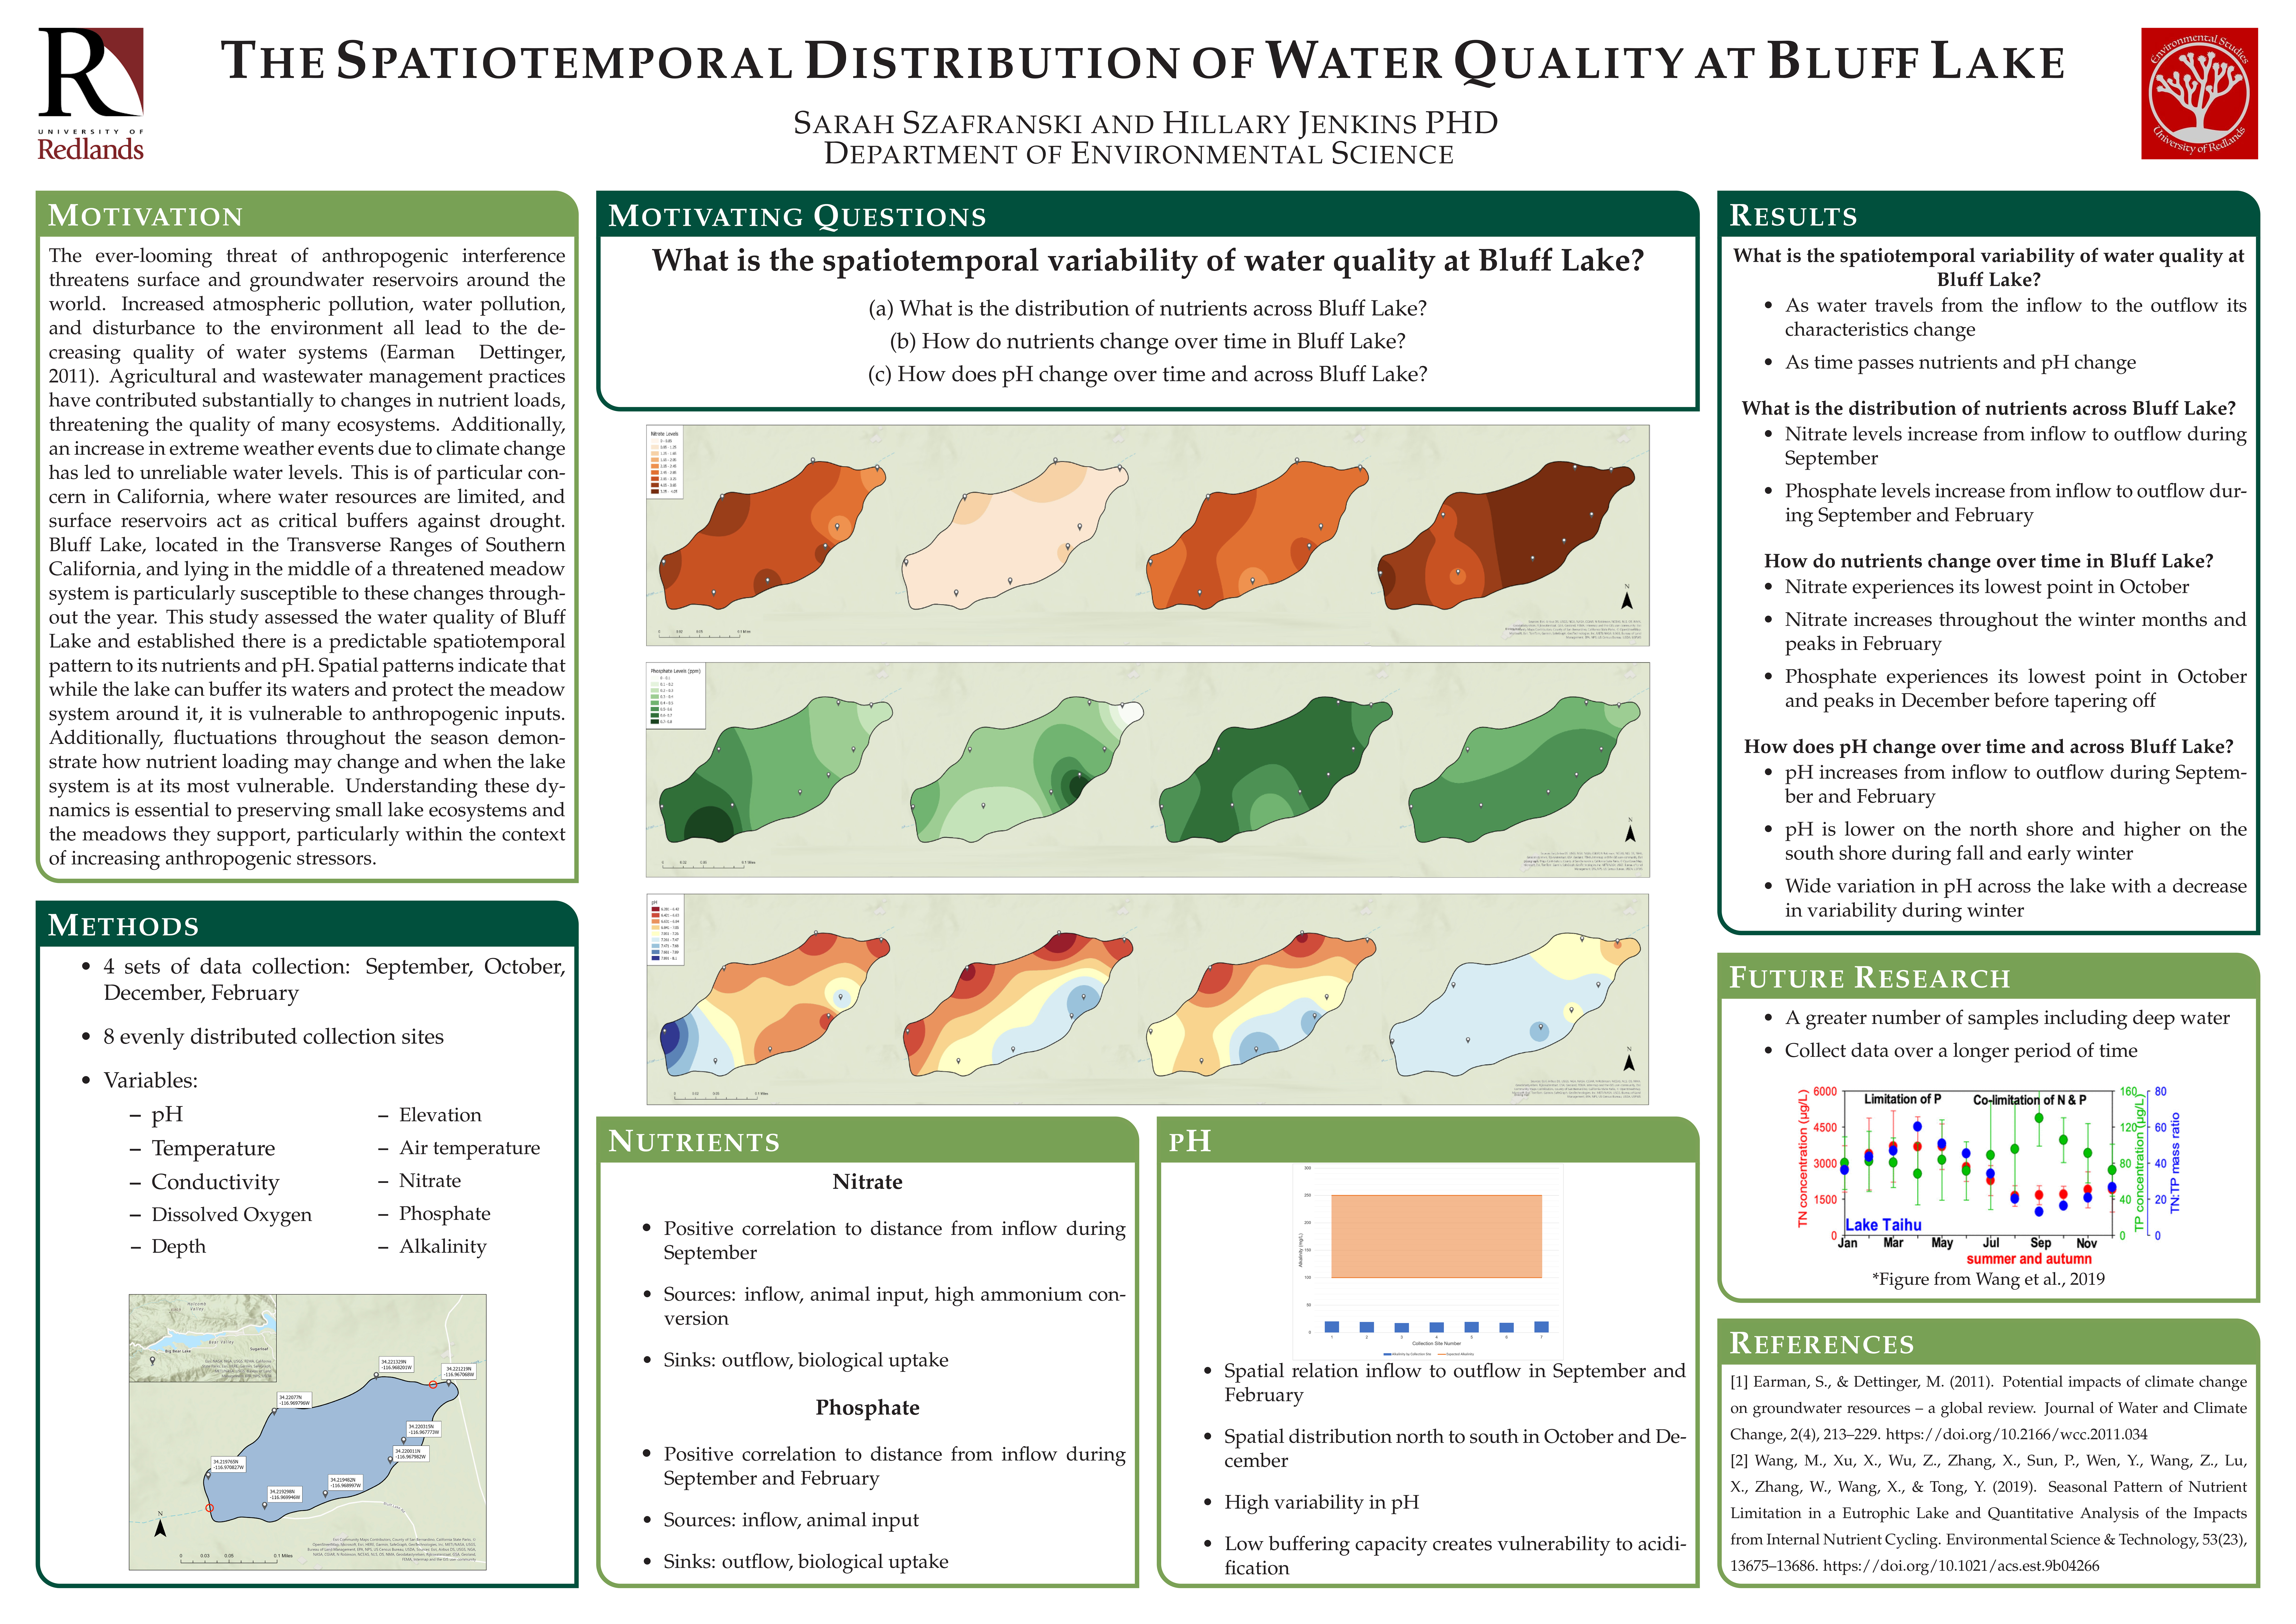 Spatiotemporal_Distribution_of_Water_Quality_at_Bluff_Lake.jpg